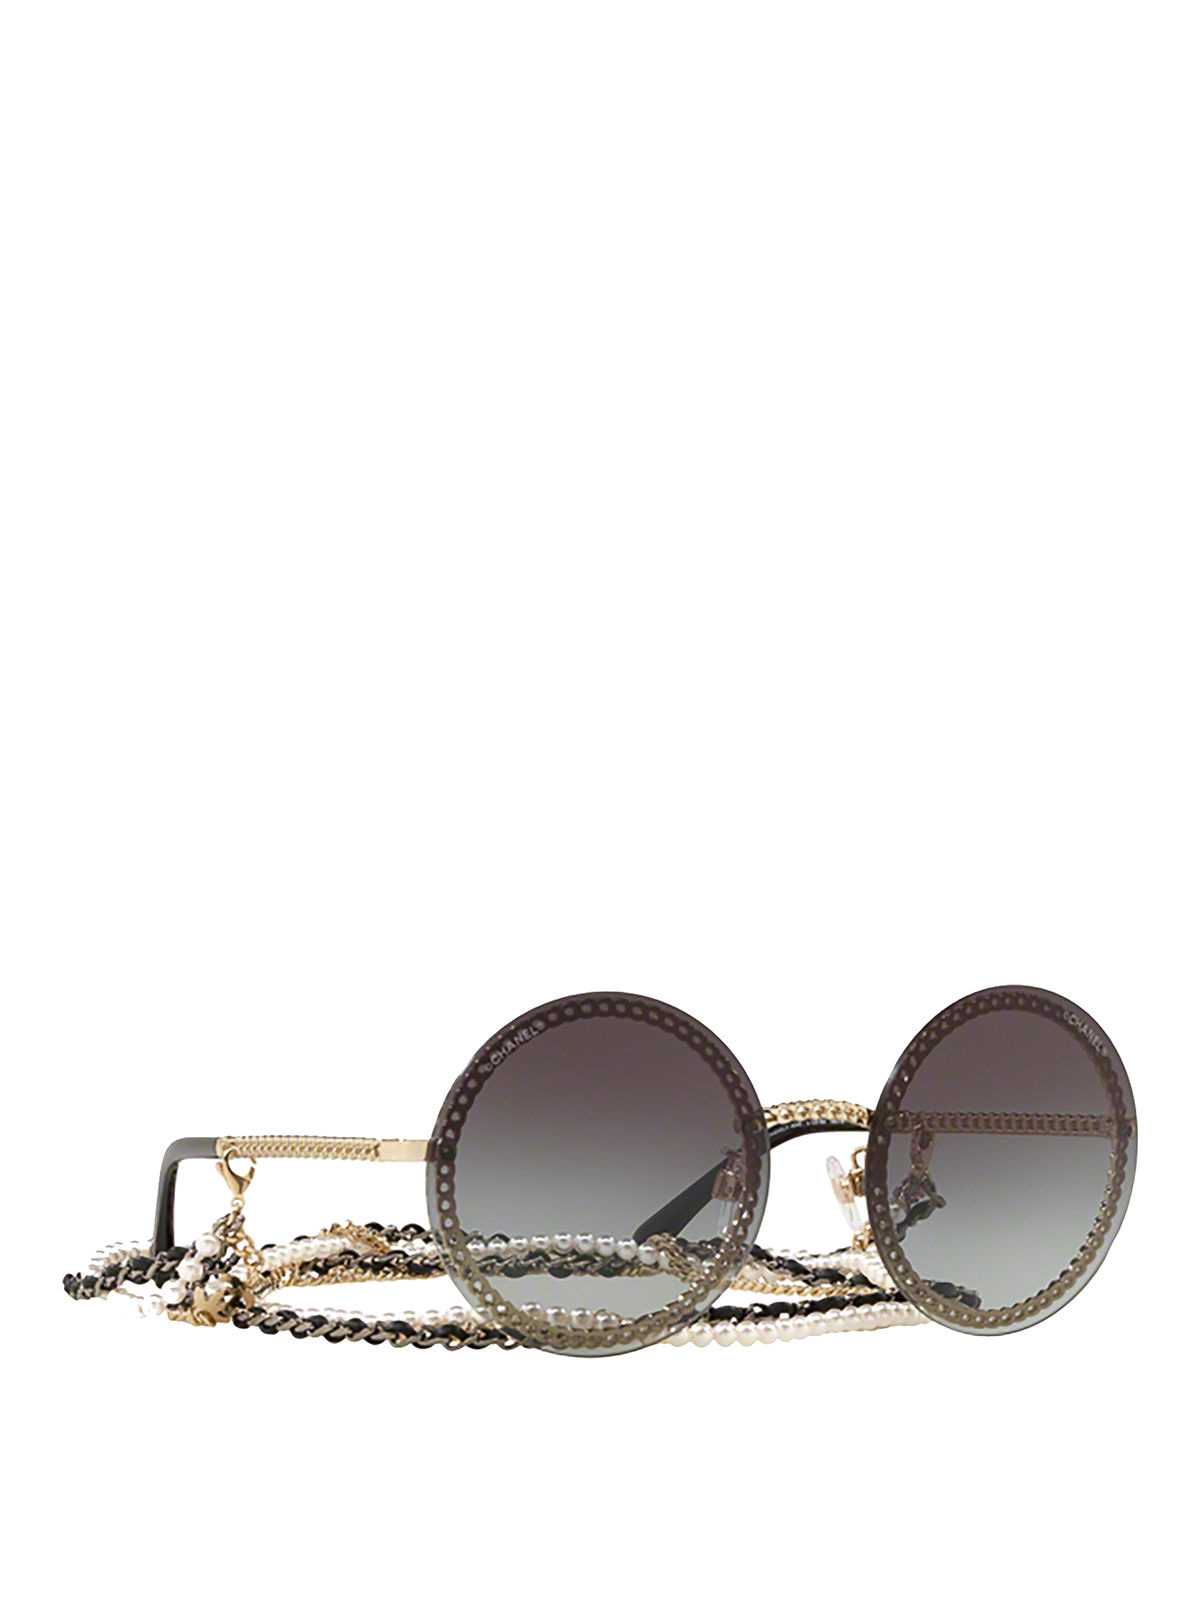 Sunglasses Chanel - Chain embellished black round sunglasses - CH4245C125S6